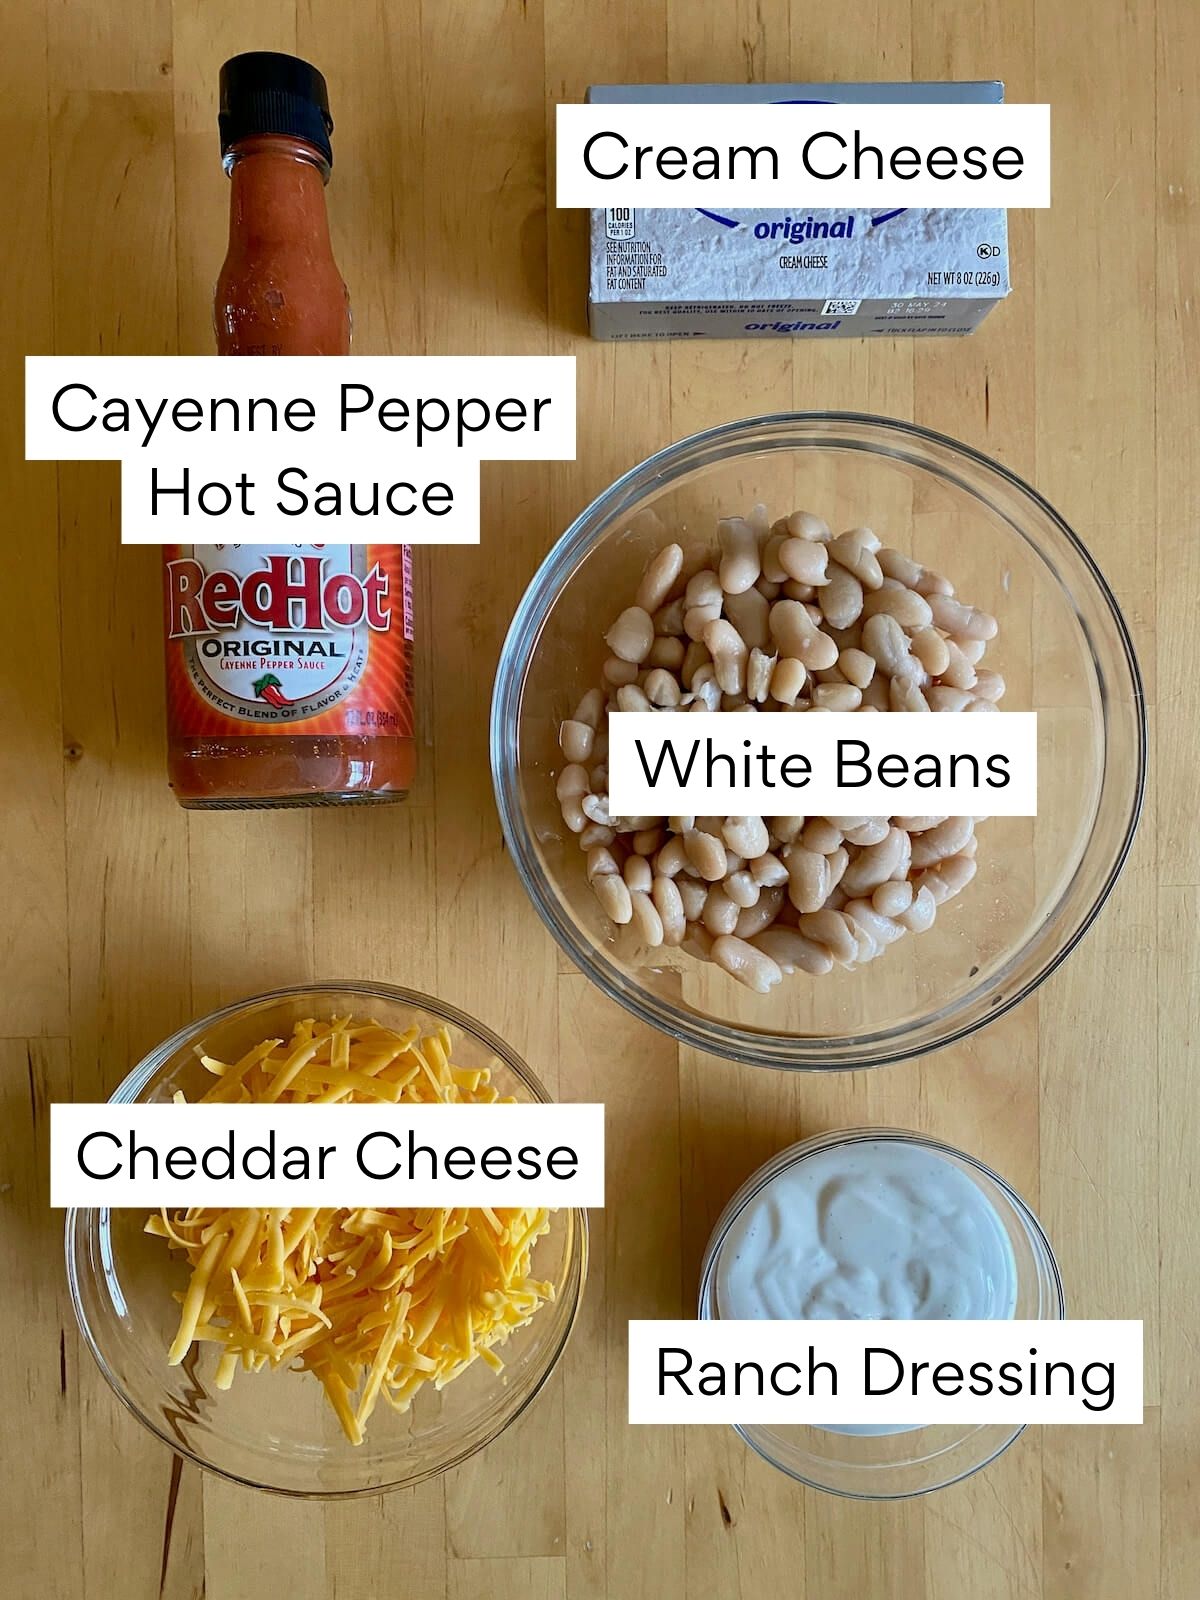 The ingredients to make white bean buffalo dip. Each ingredient is labeled with text. They include cream cheese, cayenne pepper hot sauce, white beans, cheddar cheese, and ranch dressing.